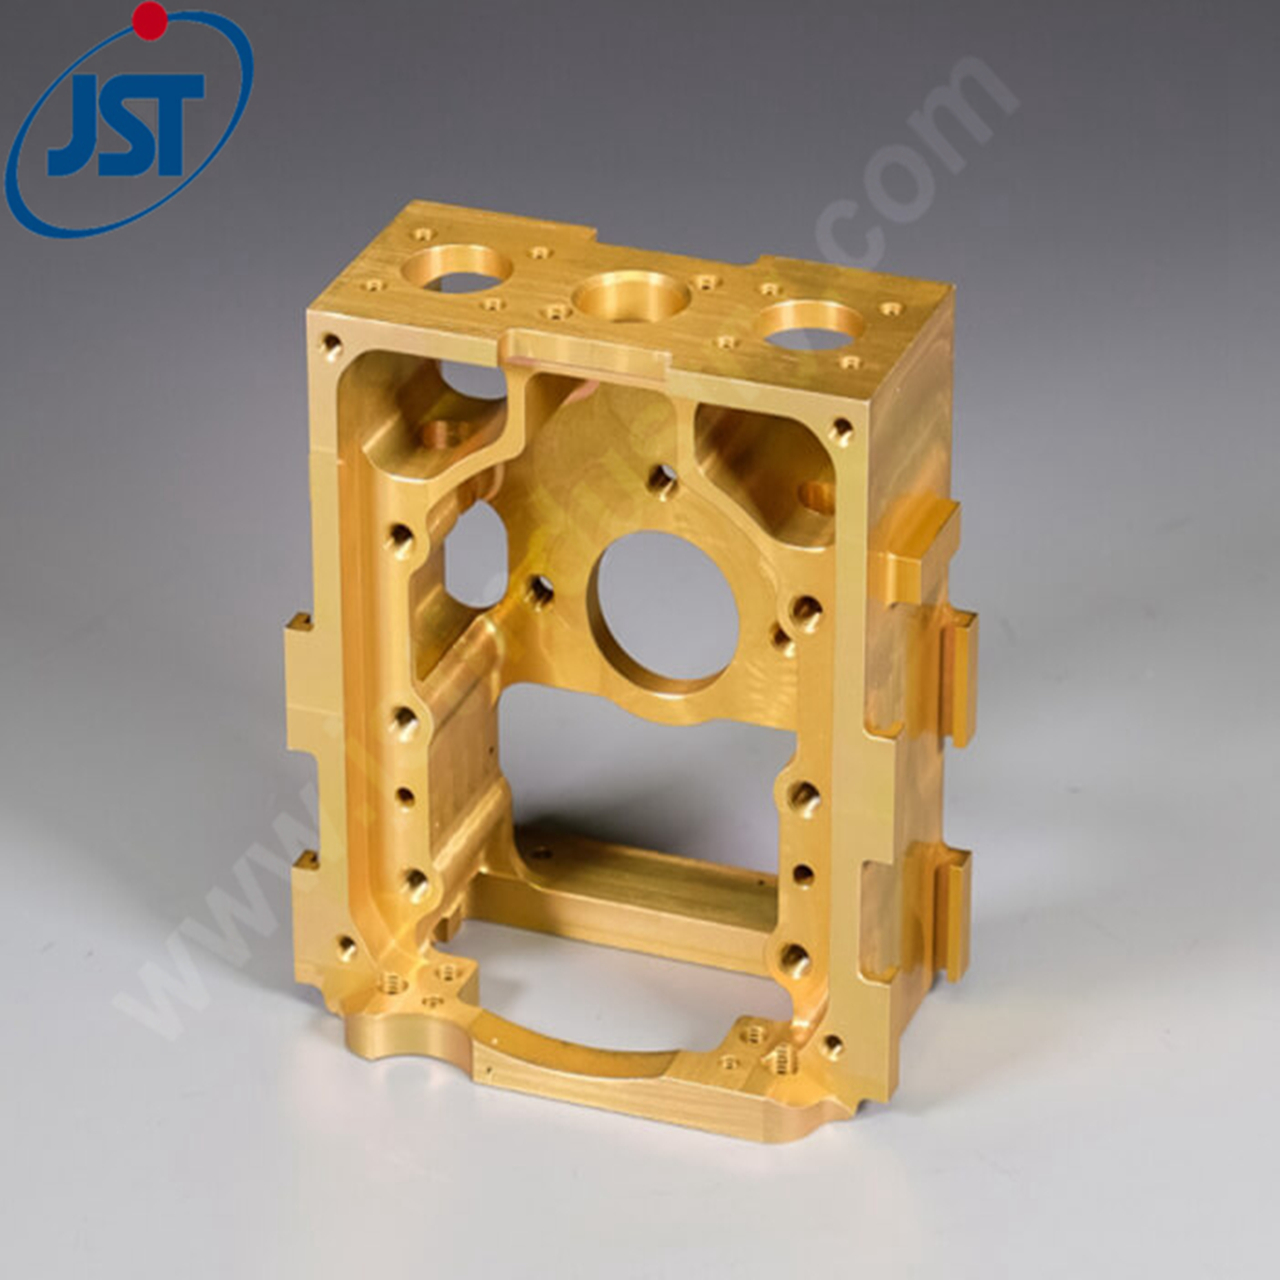 What are the benefits of cnc machining with brass?